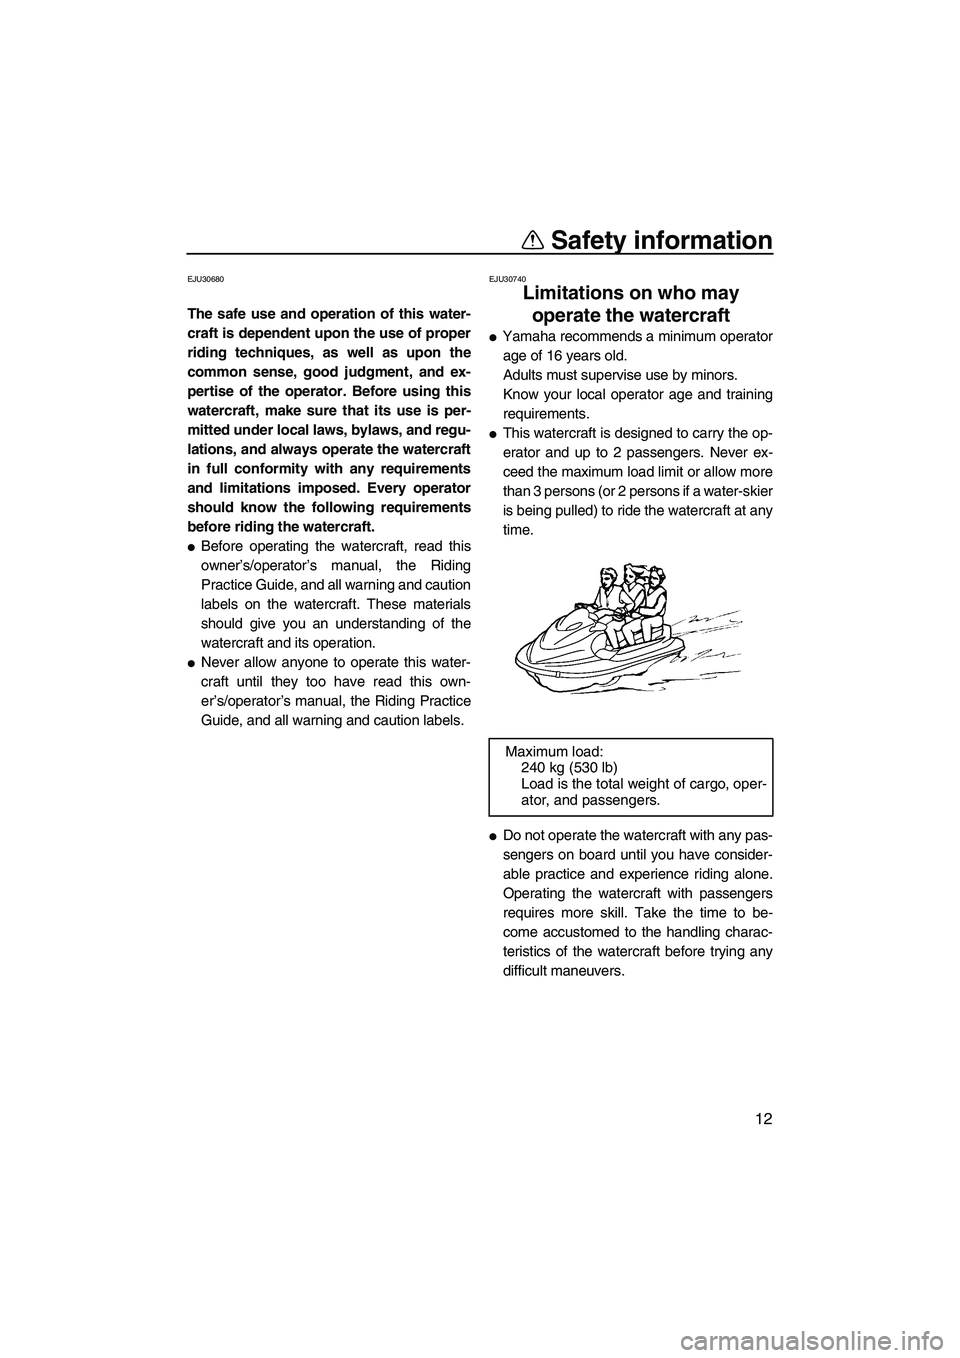 YAMAHA VX CRUISER 2007 User Guide Safety information
12
EJU30680
The safe use and operation of this water-
craft is dependent upon the use of proper
riding techniques, as well as upon the
common sense, good judgment, and ex-
pertise o